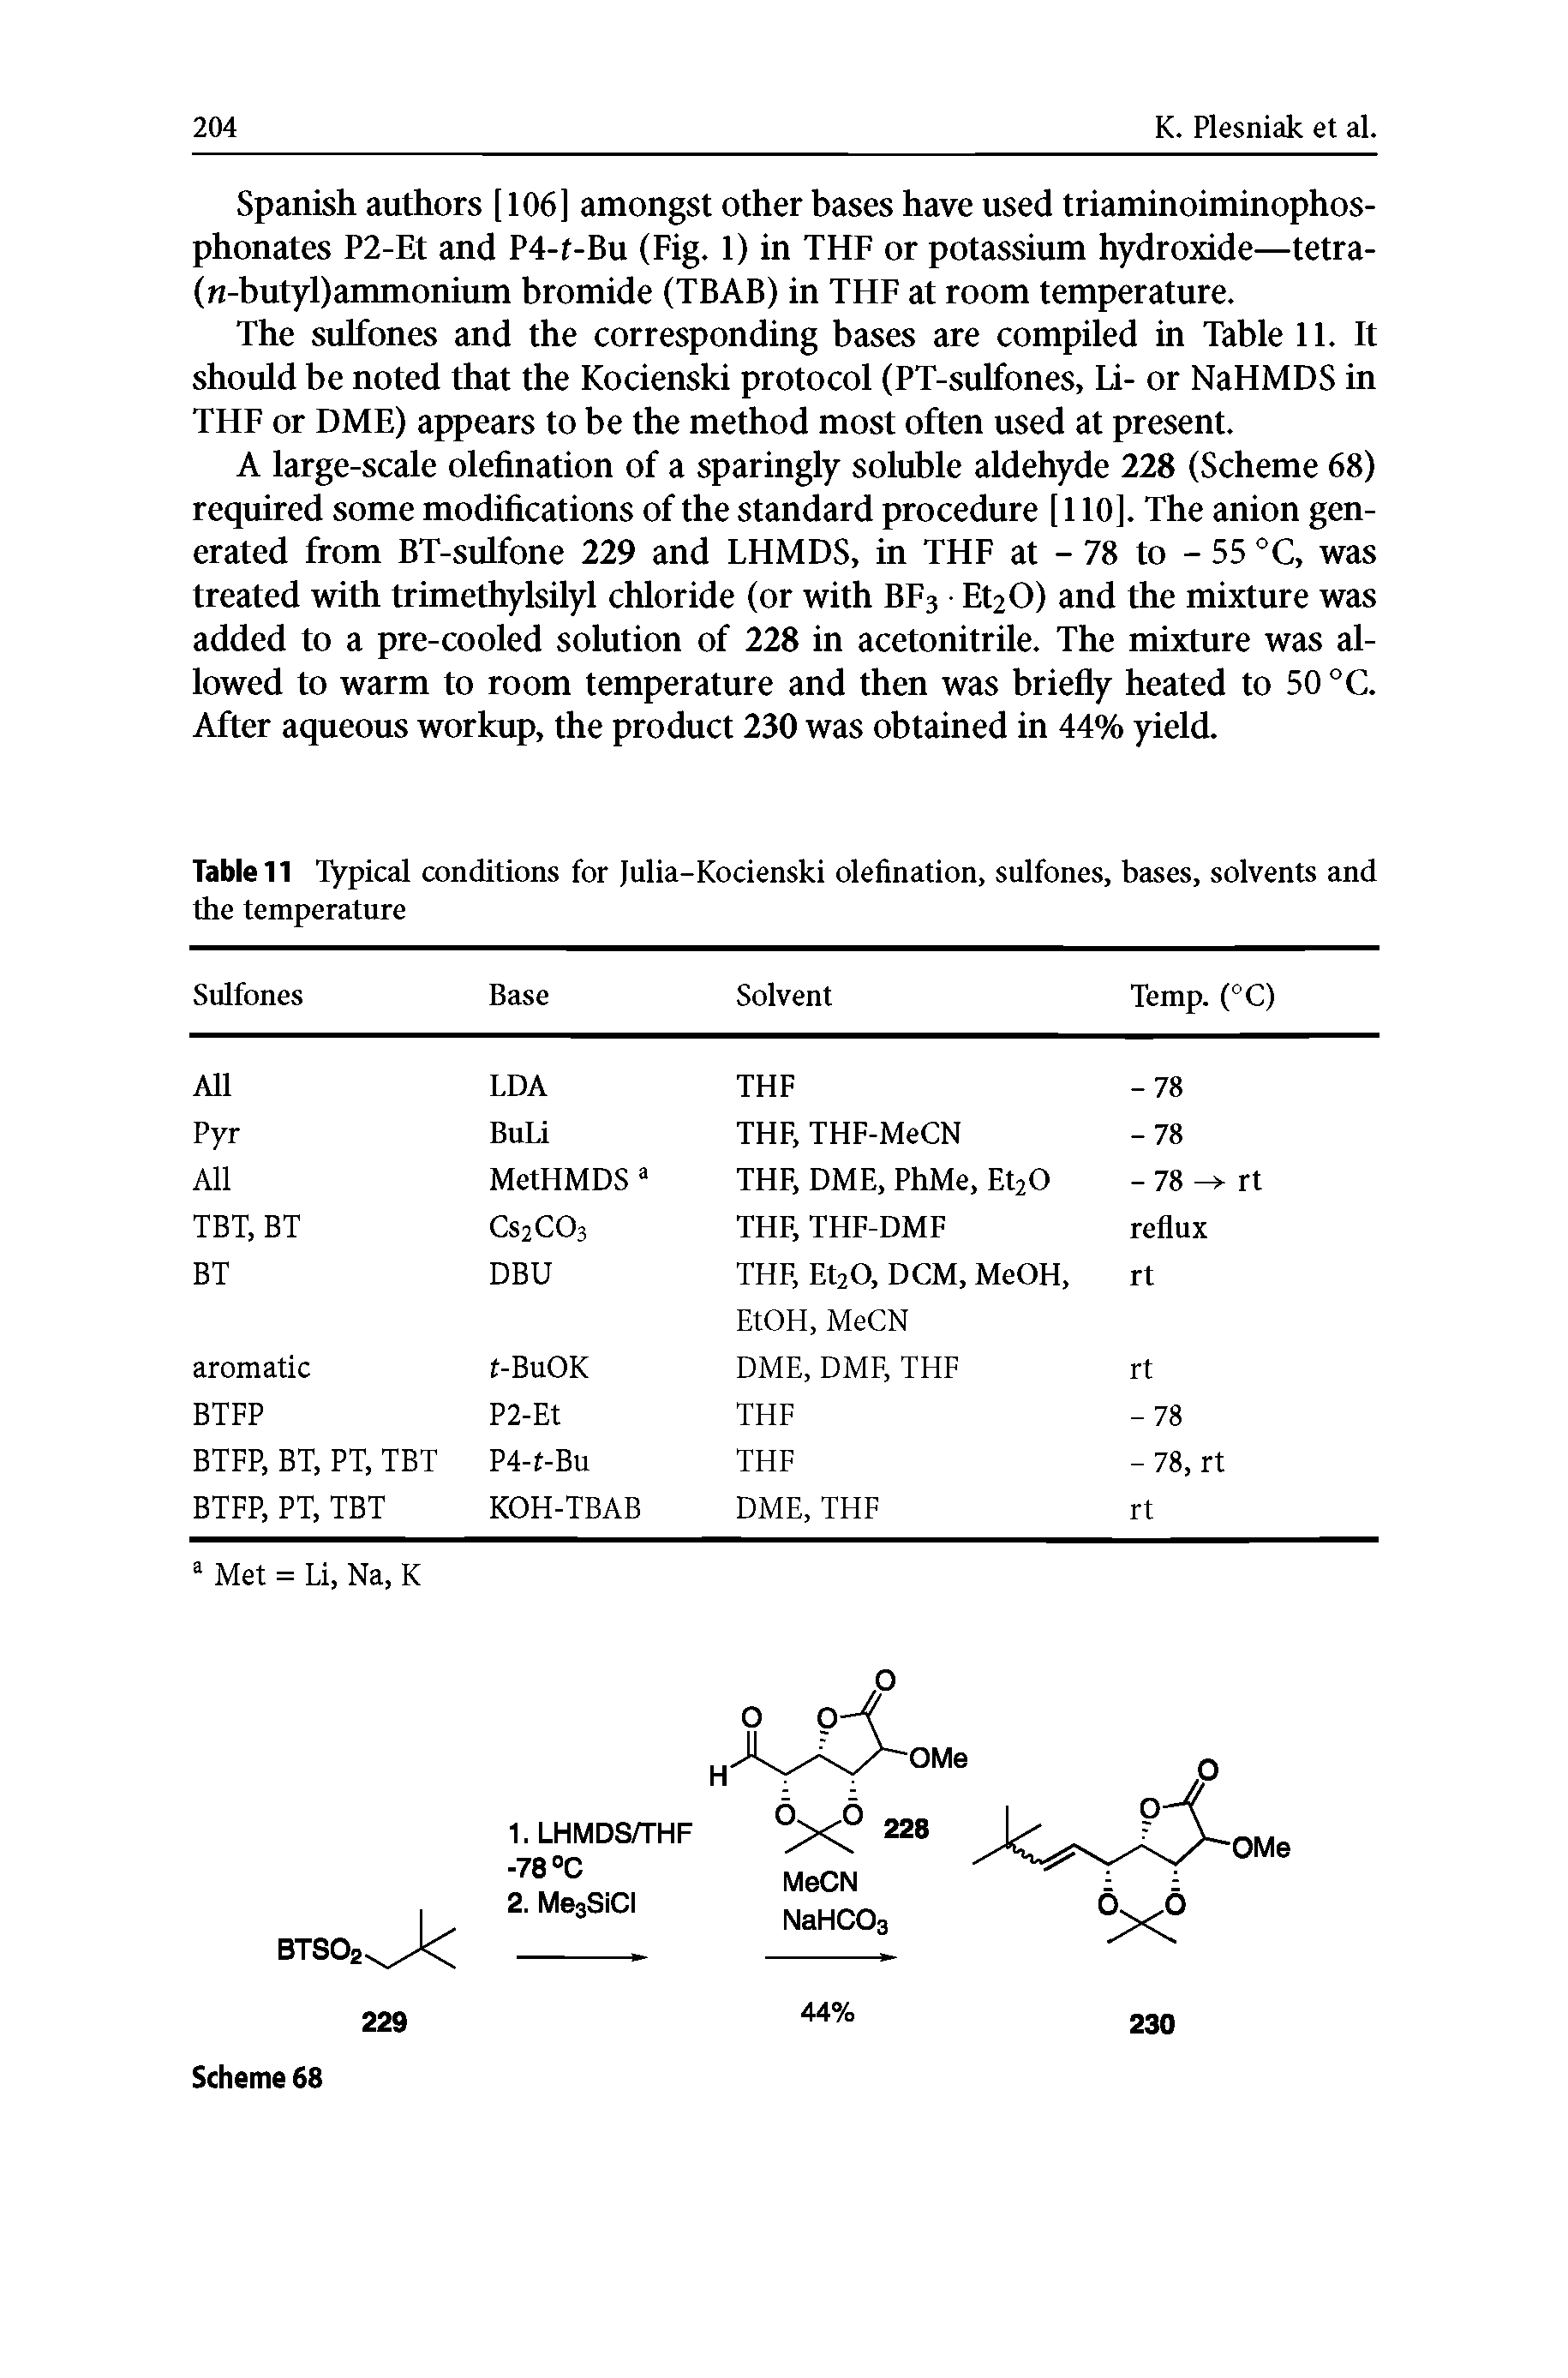 Table 11 Typical conditions for Julia-Kocienski olefination, sulfones, bases, solvents and the temperature...